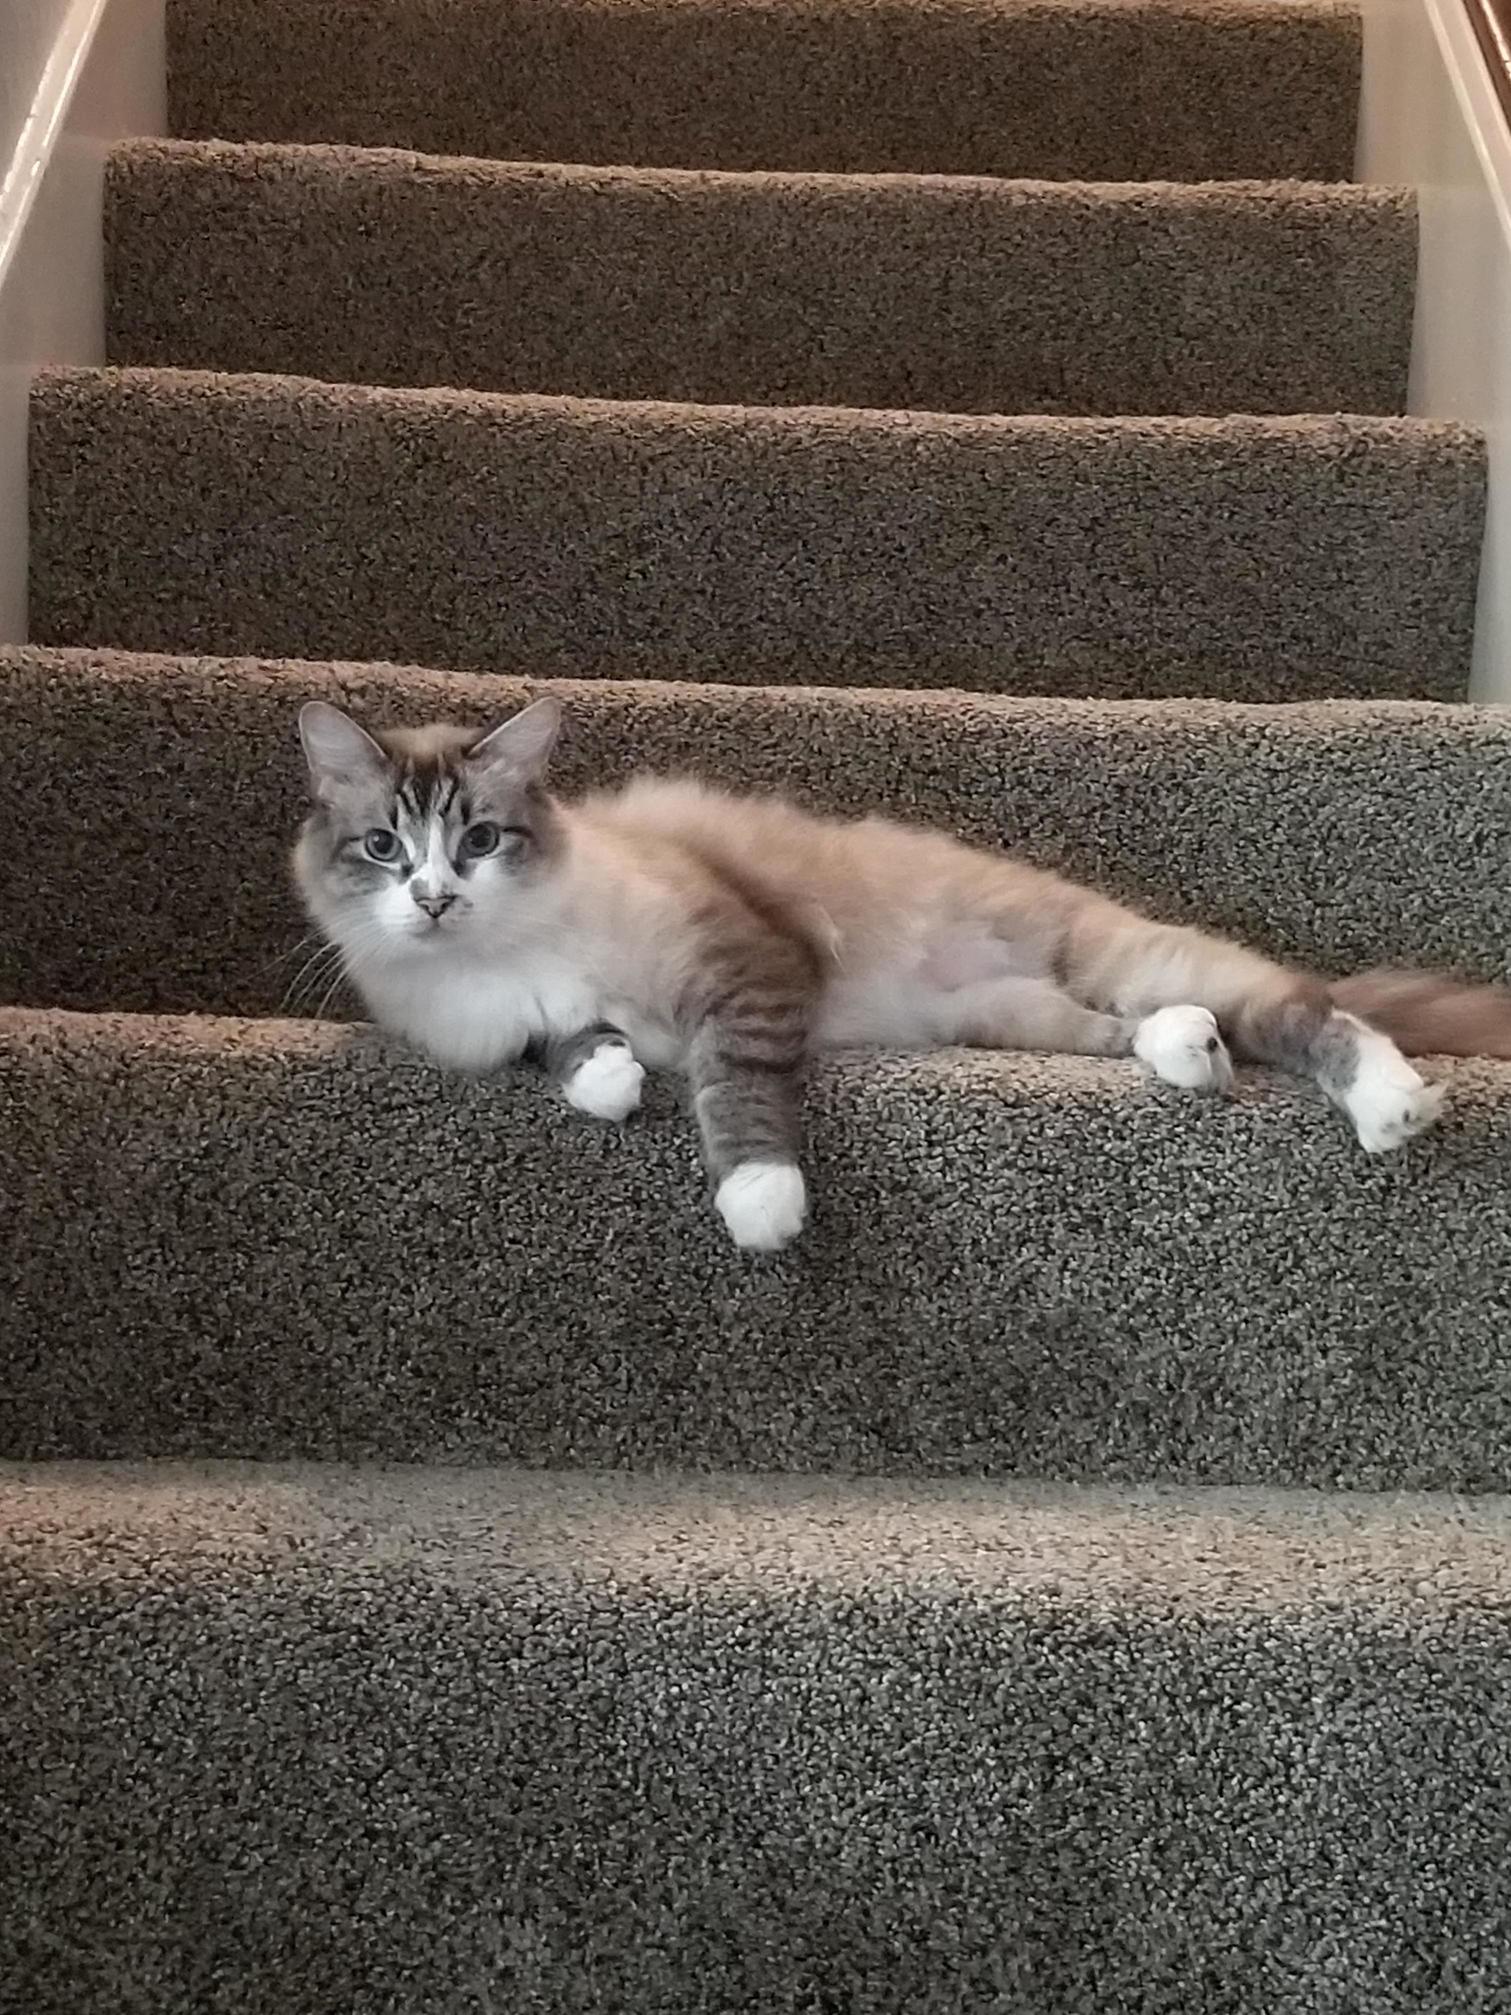 We moved into a new house, someone likes the stairs